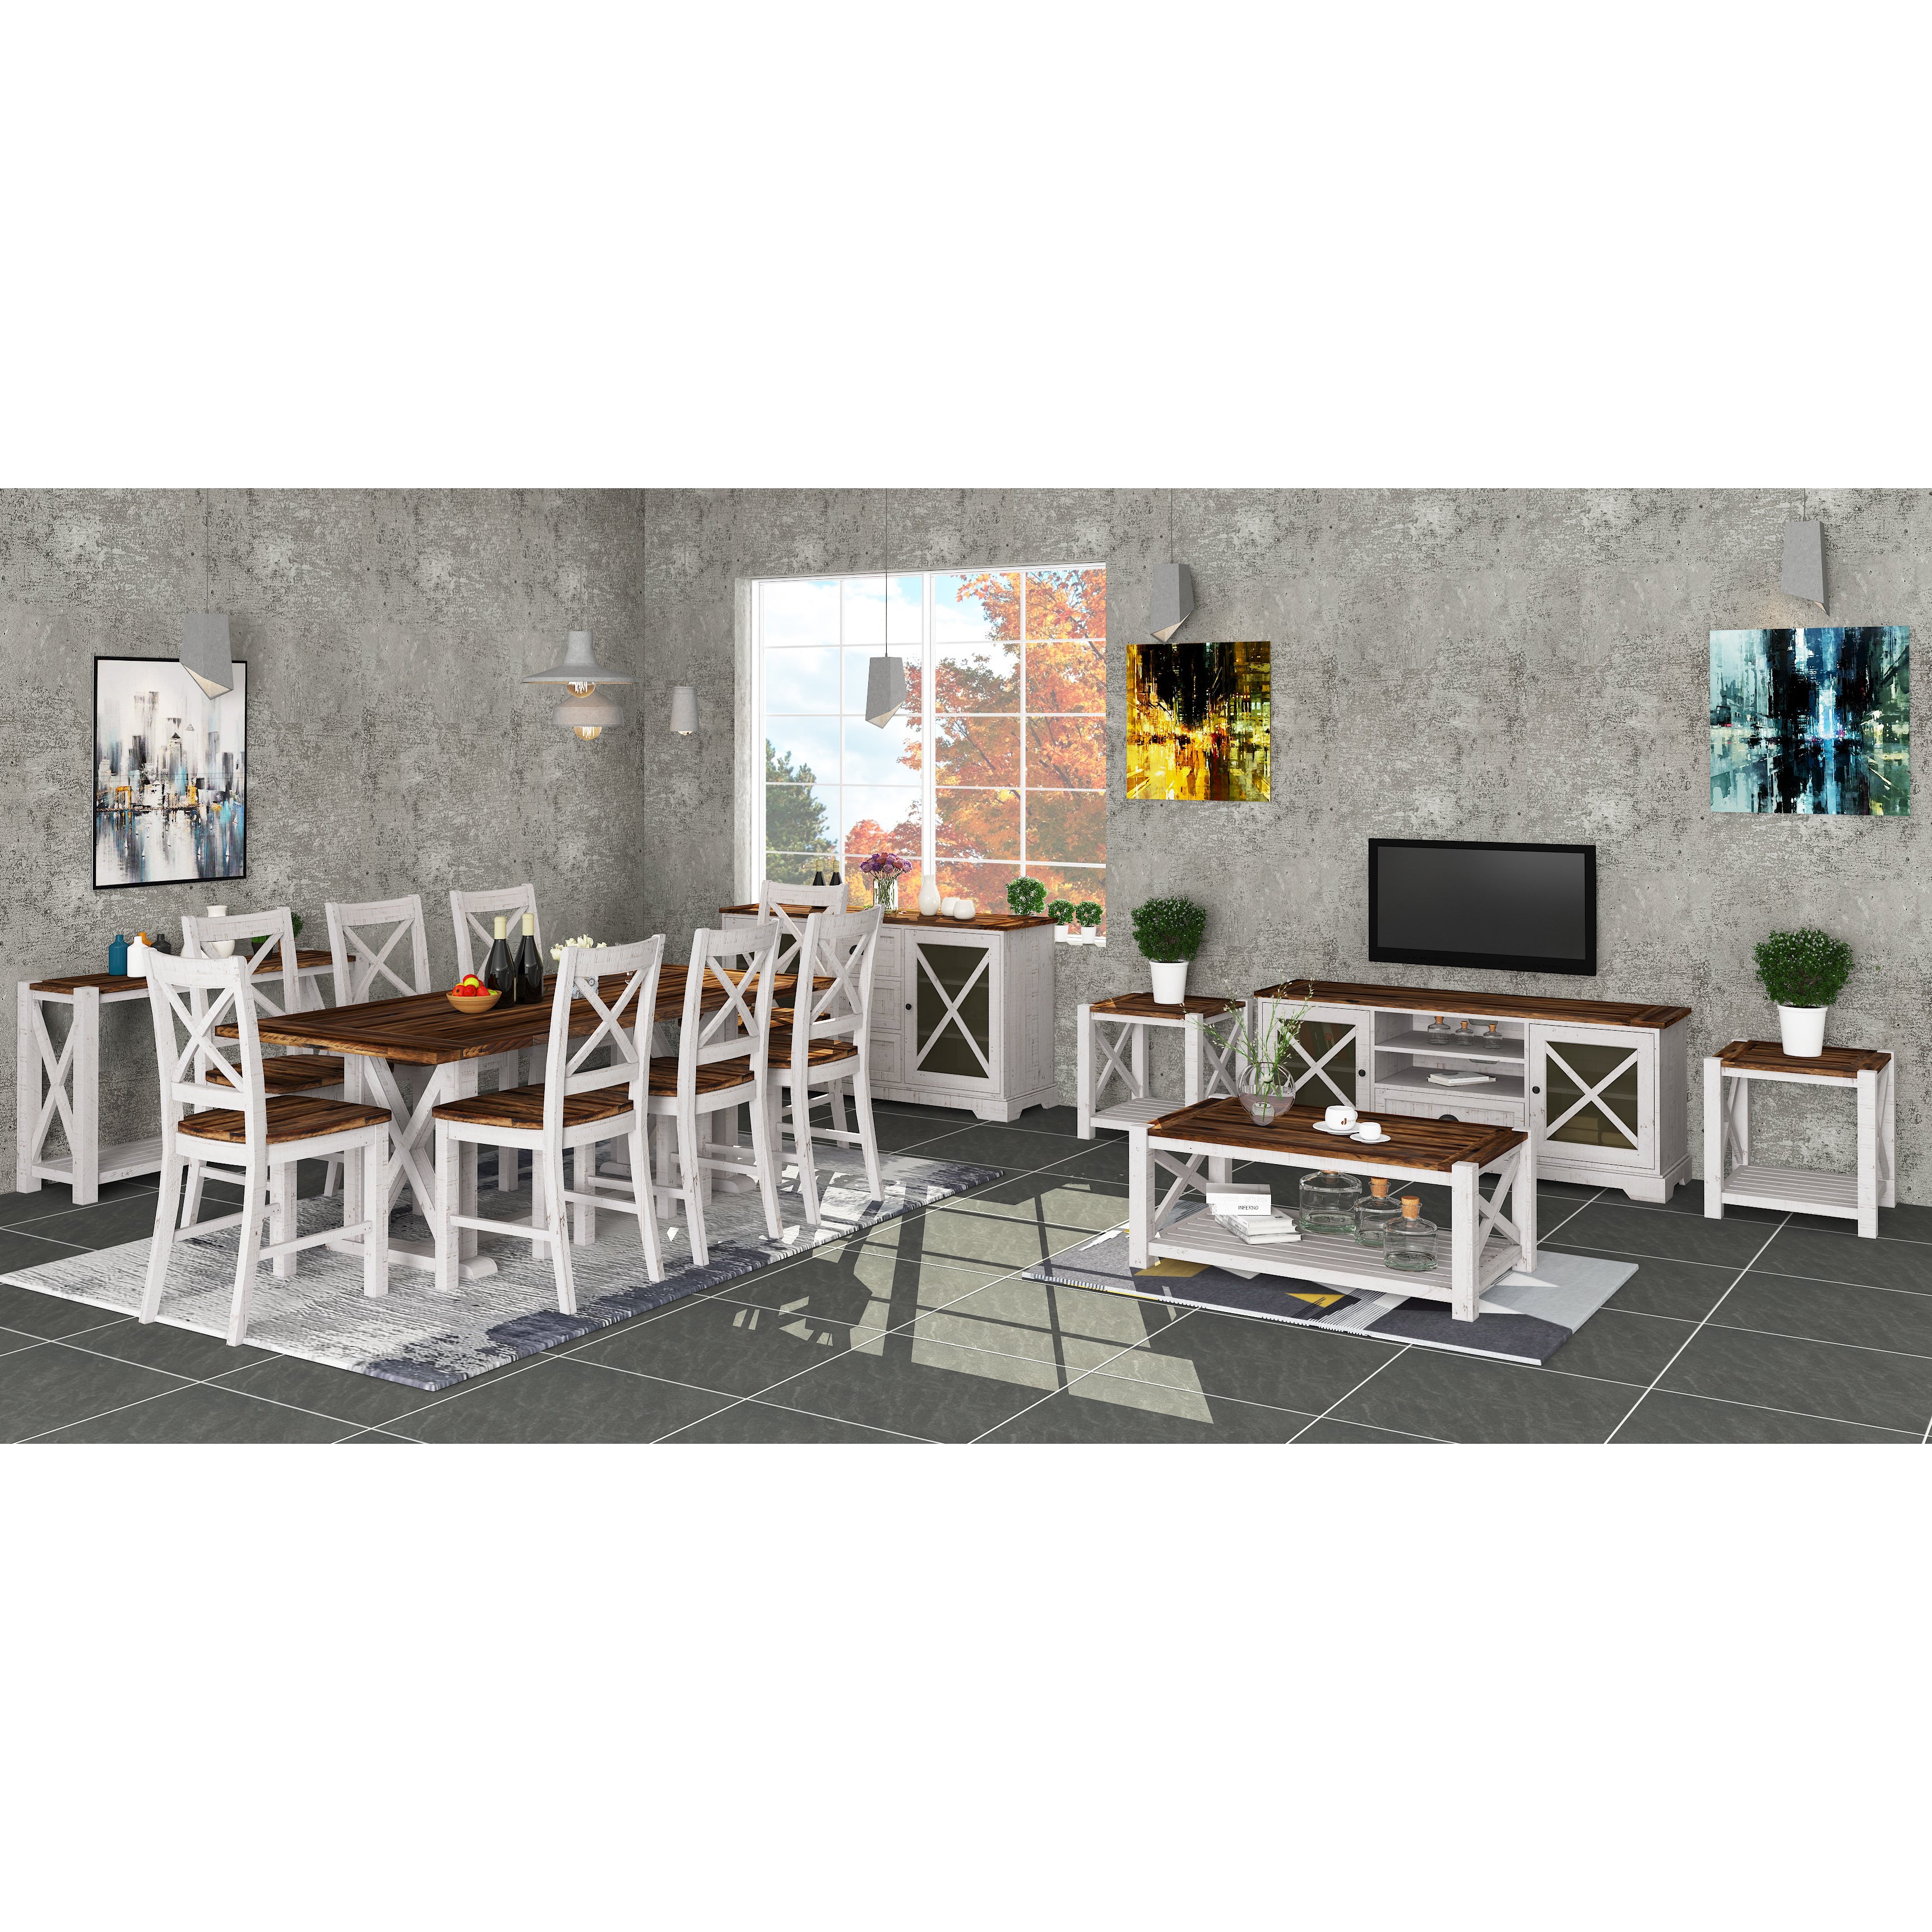 Erica 7pc Dining Set 200cm Table 6 Chair Solid Acacia Wood Timber Brown White - SILBERSHELL